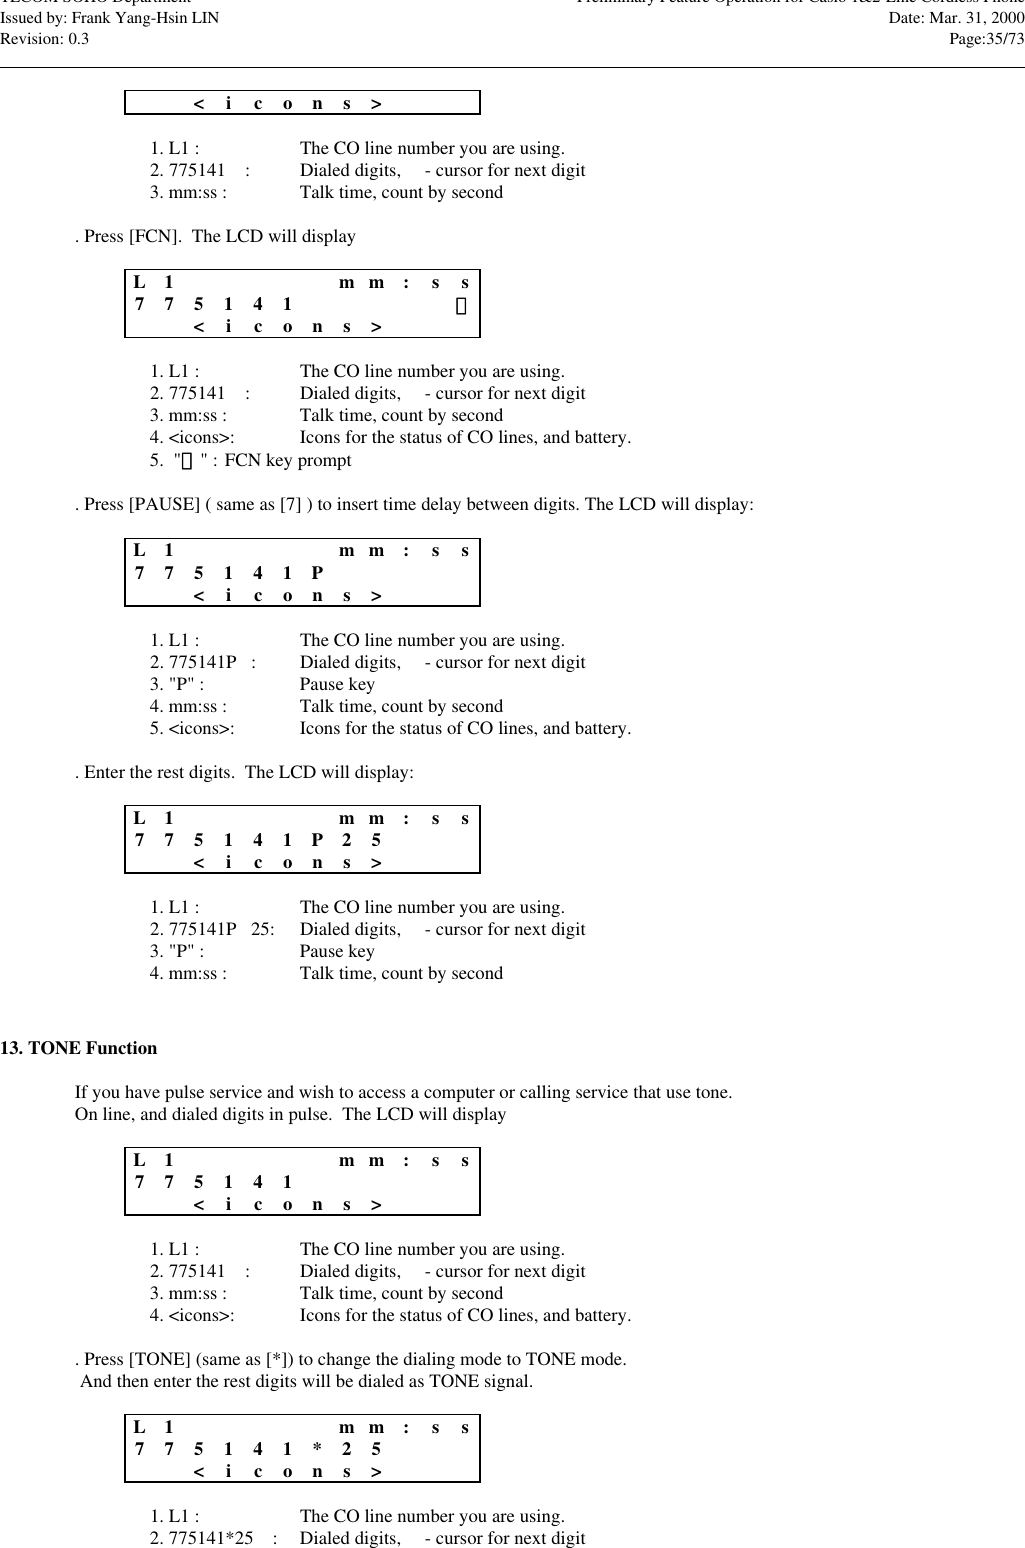 TECOM SOHO Department Preliminary Feature Operation for Casio 1&amp;2-Line Cordless PhoneIssued by: Frank Yang-Hsin LIN Date: Mar. 31, 2000Revision: 0.3 Page:35/73                                                                                                                                                                                                                                                                                                                            &lt;icons&gt;1. L1 : The CO line number you are using.2. 775141n : Dialed digits, n - cursor for next digit3. mm:ss : Talk time, count by second. Press [FCN].  The LCD will displayL1m m :s s775141n&lt;icons&gt;1. L1 : The CO line number you are using.2. 775141n : Dialed digits, n - cursor for next digit3. mm:ss : Talk time, count by second4. &lt;icons&gt;: Icons for the status of CO lines, and battery.5.  &quot;&quot; : FCN key prompt. Press [PAUSE] ( same as [7] ) to insert time delay between digits. The LCD will display:L1m m :s s775141Pn&lt;icons&gt;1. L1 : The CO line number you are using.2. 775141Pn:Dialed digits, n - cursor for next digit3. &quot;P&quot; : Pause key4. mm:ss : Talk time, count by second5. &lt;icons&gt;: Icons for the status of CO lines, and battery.. Enter the rest digits.  The LCD will display:L1m m :s s775141P2 5 n&lt;icons&gt;1. L1 : The CO line number you are using.2. 775141Pn25: Dialed digits, n - cursor for next digit3. &quot;P&quot; : Pause key4. mm:ss : Talk time, count by second13. TONE FunctionIf you have pulse service and wish to access a computer or calling service that use tone.On line, and dialed digits in pulse.  The LCD will displayL1m m :s s775141n&lt;icons&gt;1. L1 : The CO line number you are using.2. 775141n : Dialed digits, n - cursor for next digit3. mm:ss : Talk time, count by second4. &lt;icons&gt;: Icons for the status of CO lines, and battery.. Press [TONE] (same as [*]) to change the dialing mode to TONE mode. And then enter the rest digits will be dialed as TONE signal.L1m m :s s775141*25n&lt;icons&gt;1. L1 : The CO line number you are using.2. 775141*25n : Dialed digits, n - cursor for next digit